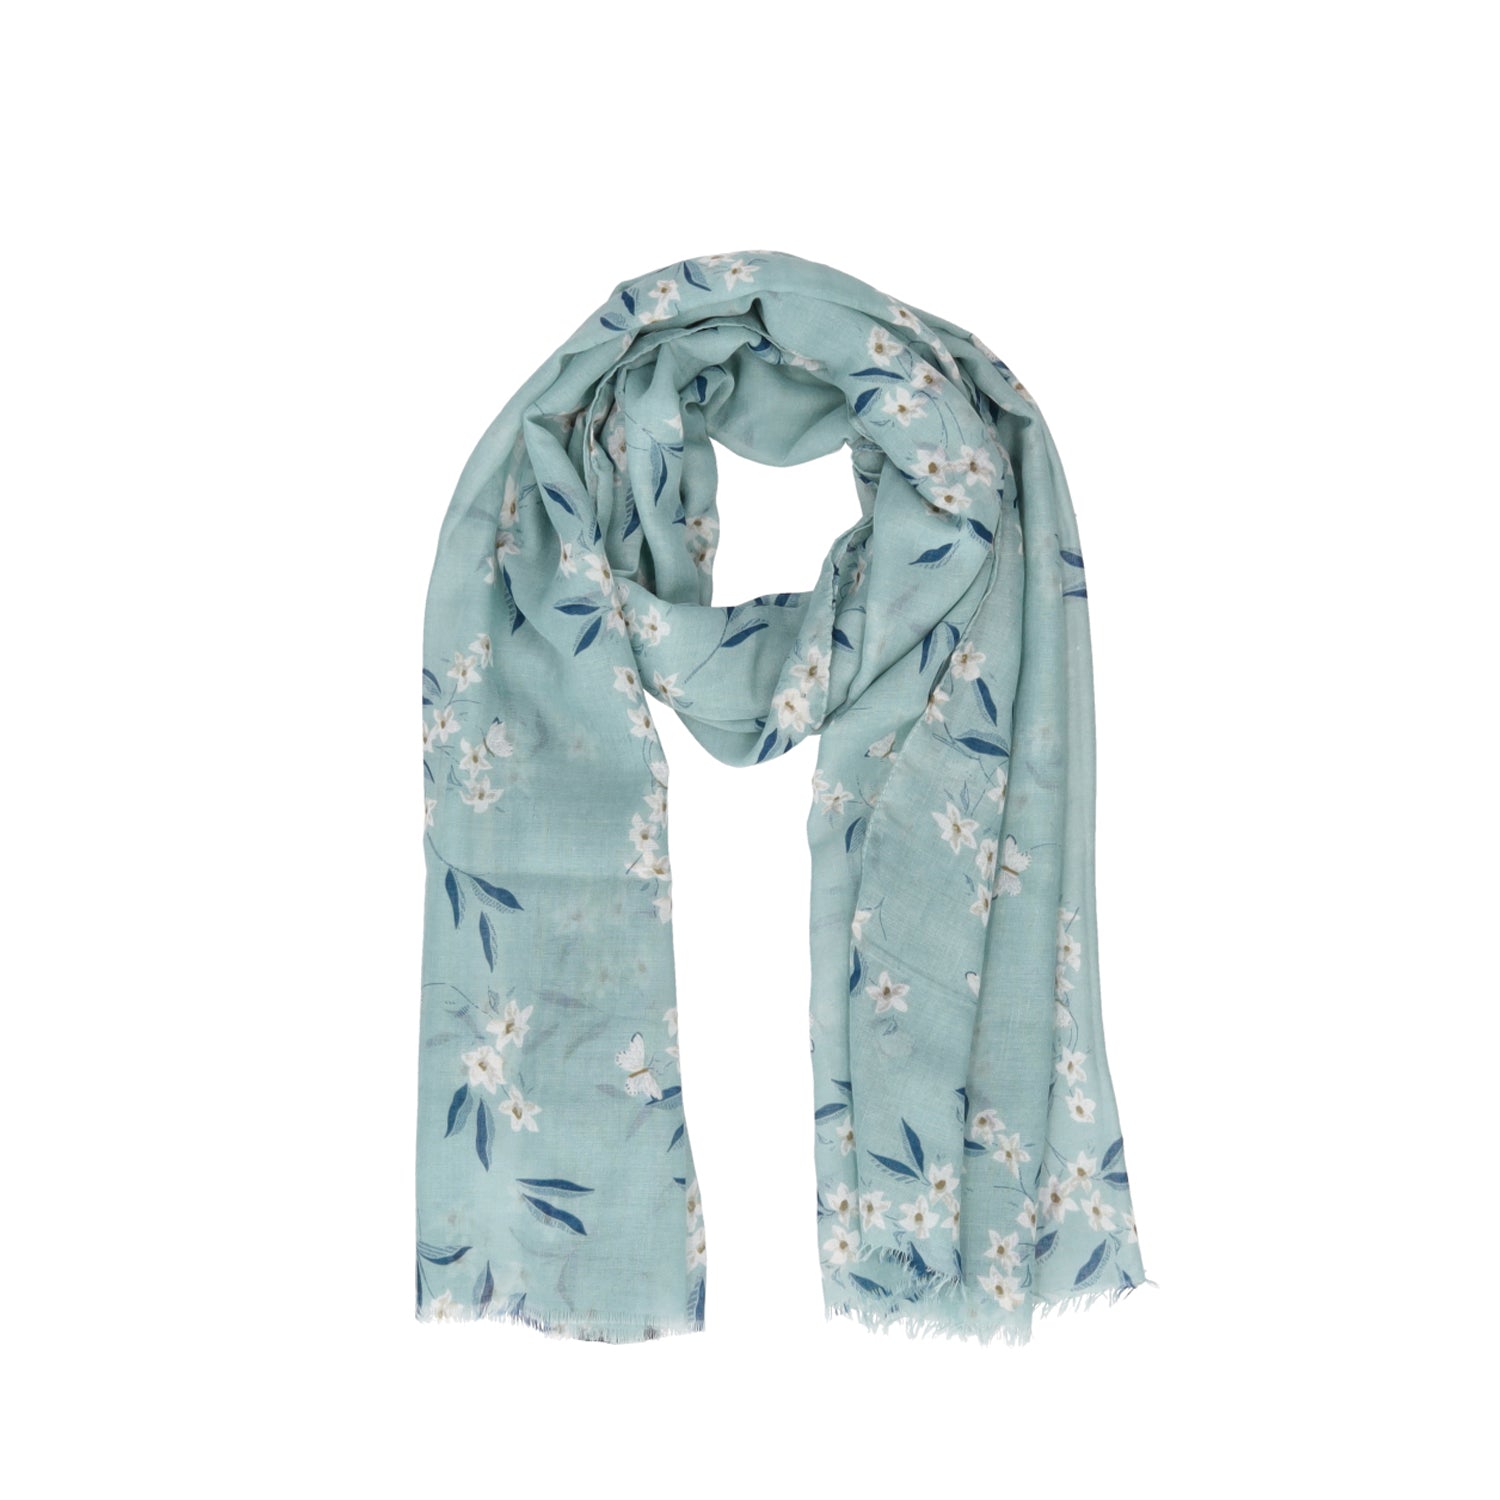 LIGHT BLUE AQUAMARINA SCARF WITH FLORAL PATTERN